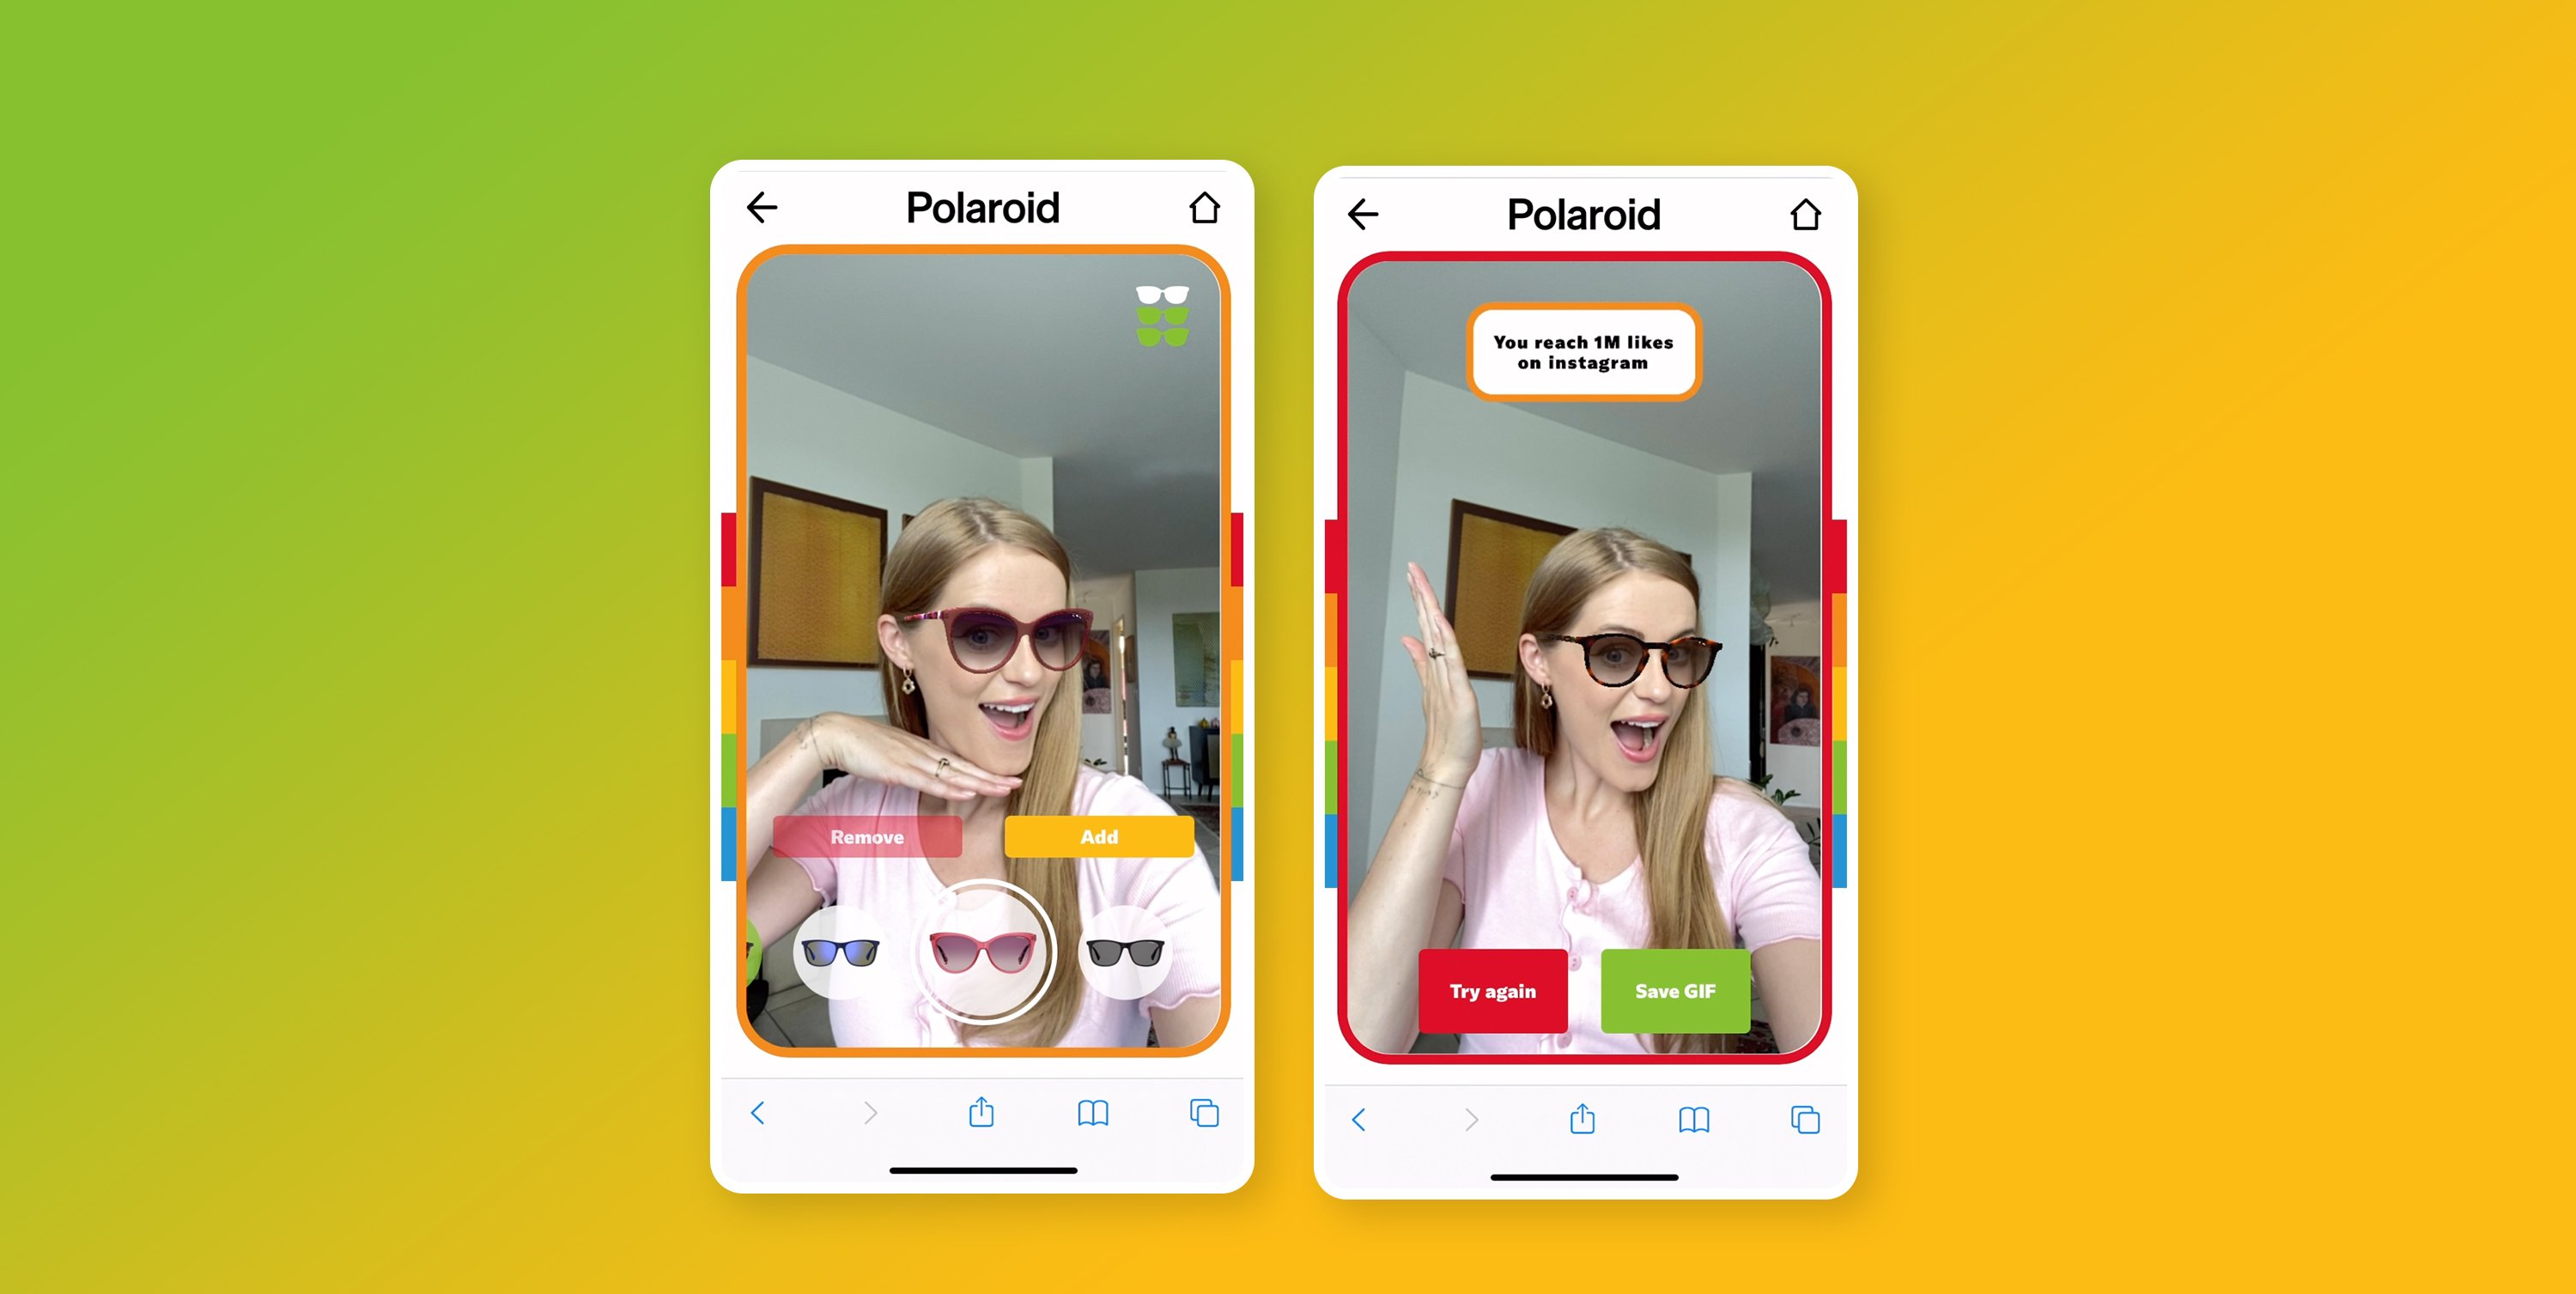 Take the GIF challenge with Polaroid Eyewear’s augmented reality try-on experience